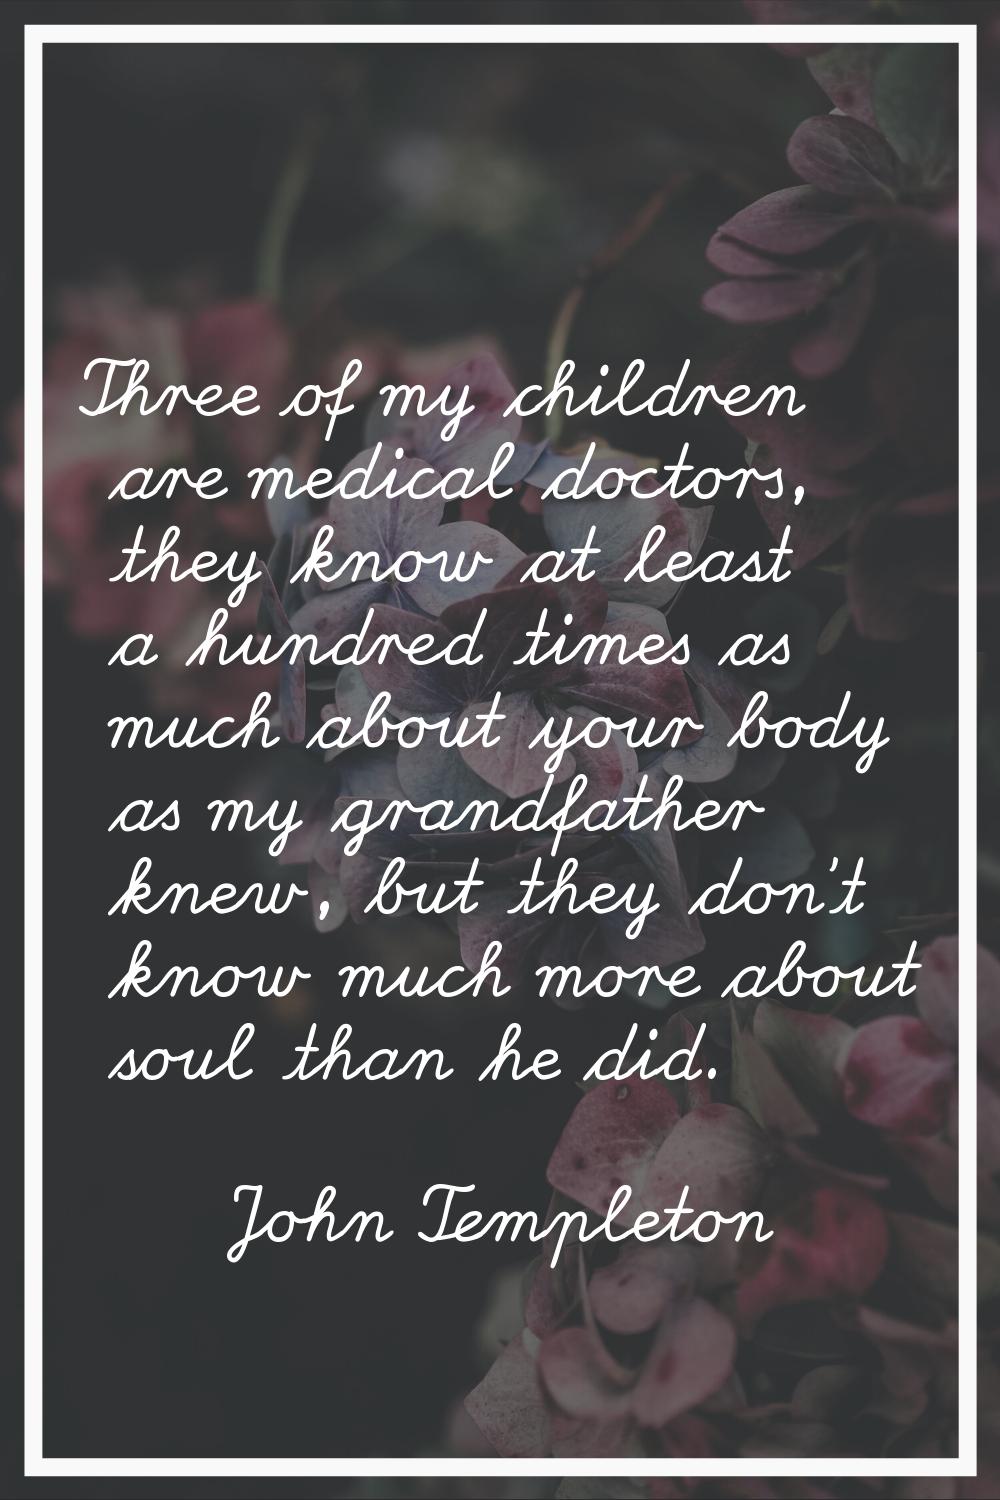 Three of my children are medical doctors, they know at least a hundred times as much about your bod